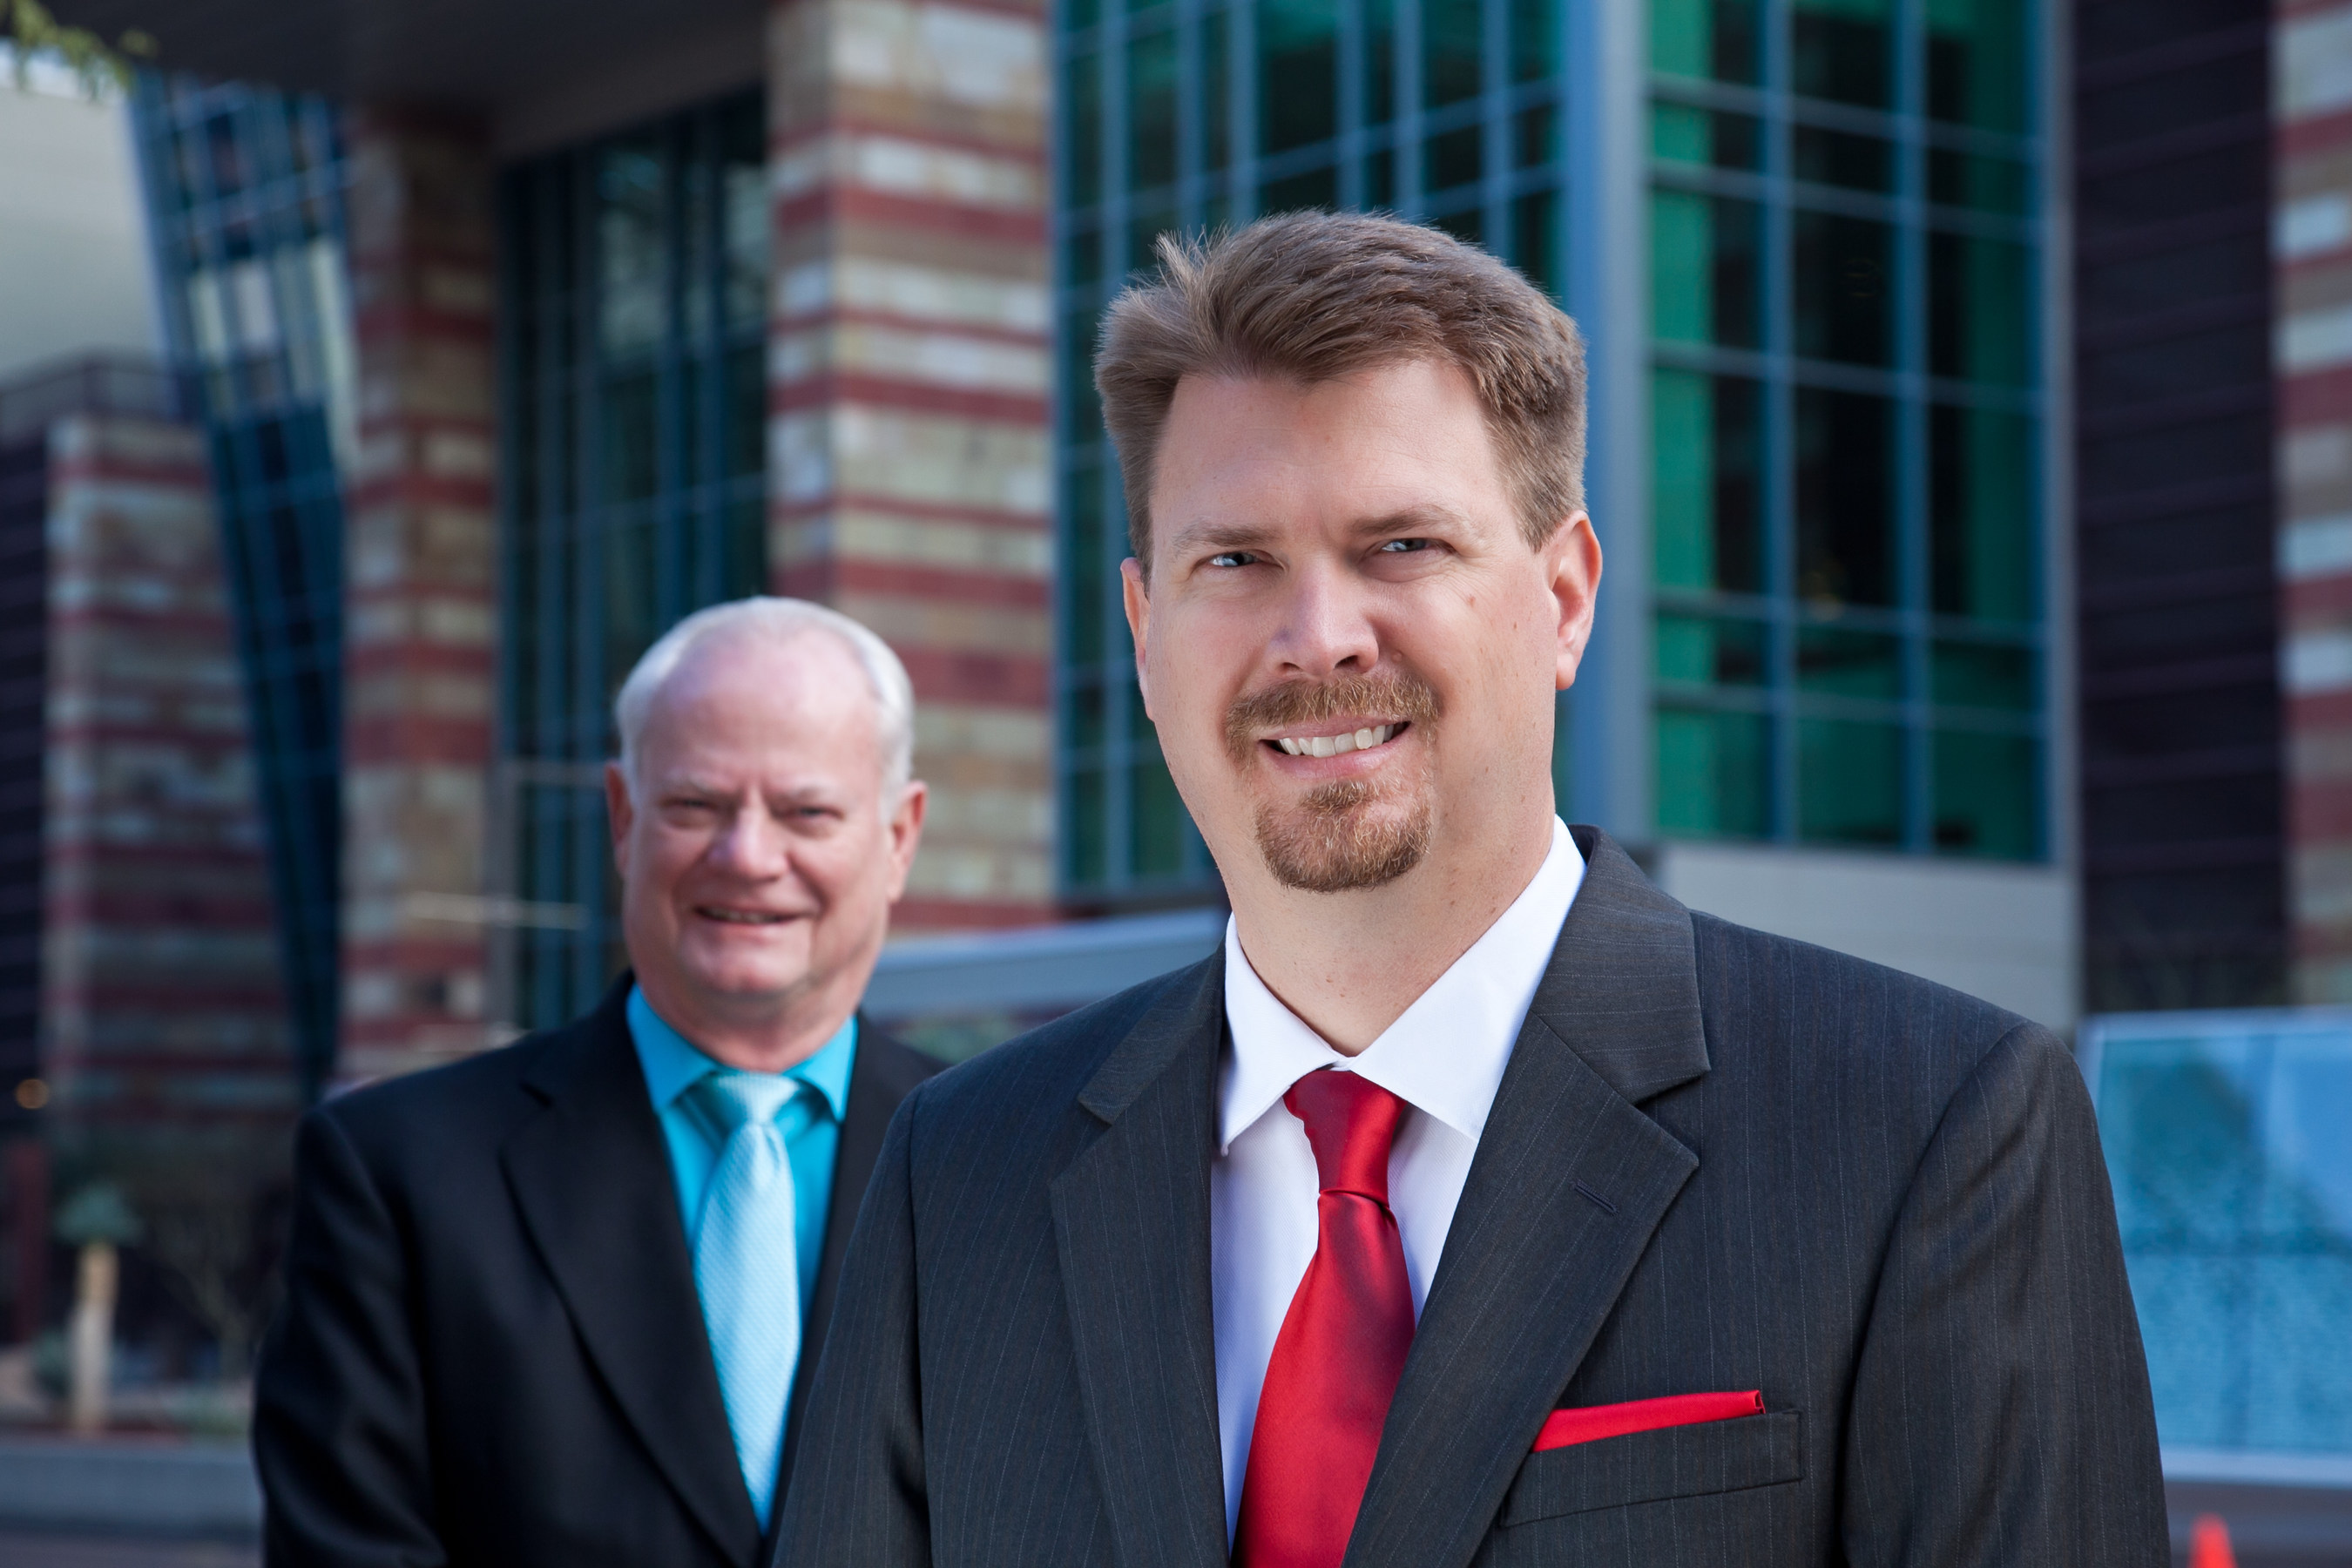 Phoenix-based design and engineering firm CVL Consultants announced that Ryan Weed, PE, (right) has assumed the role of president following the retirement of Les Olson (left). Olson will serve as president emeritus until his full retirement in May.